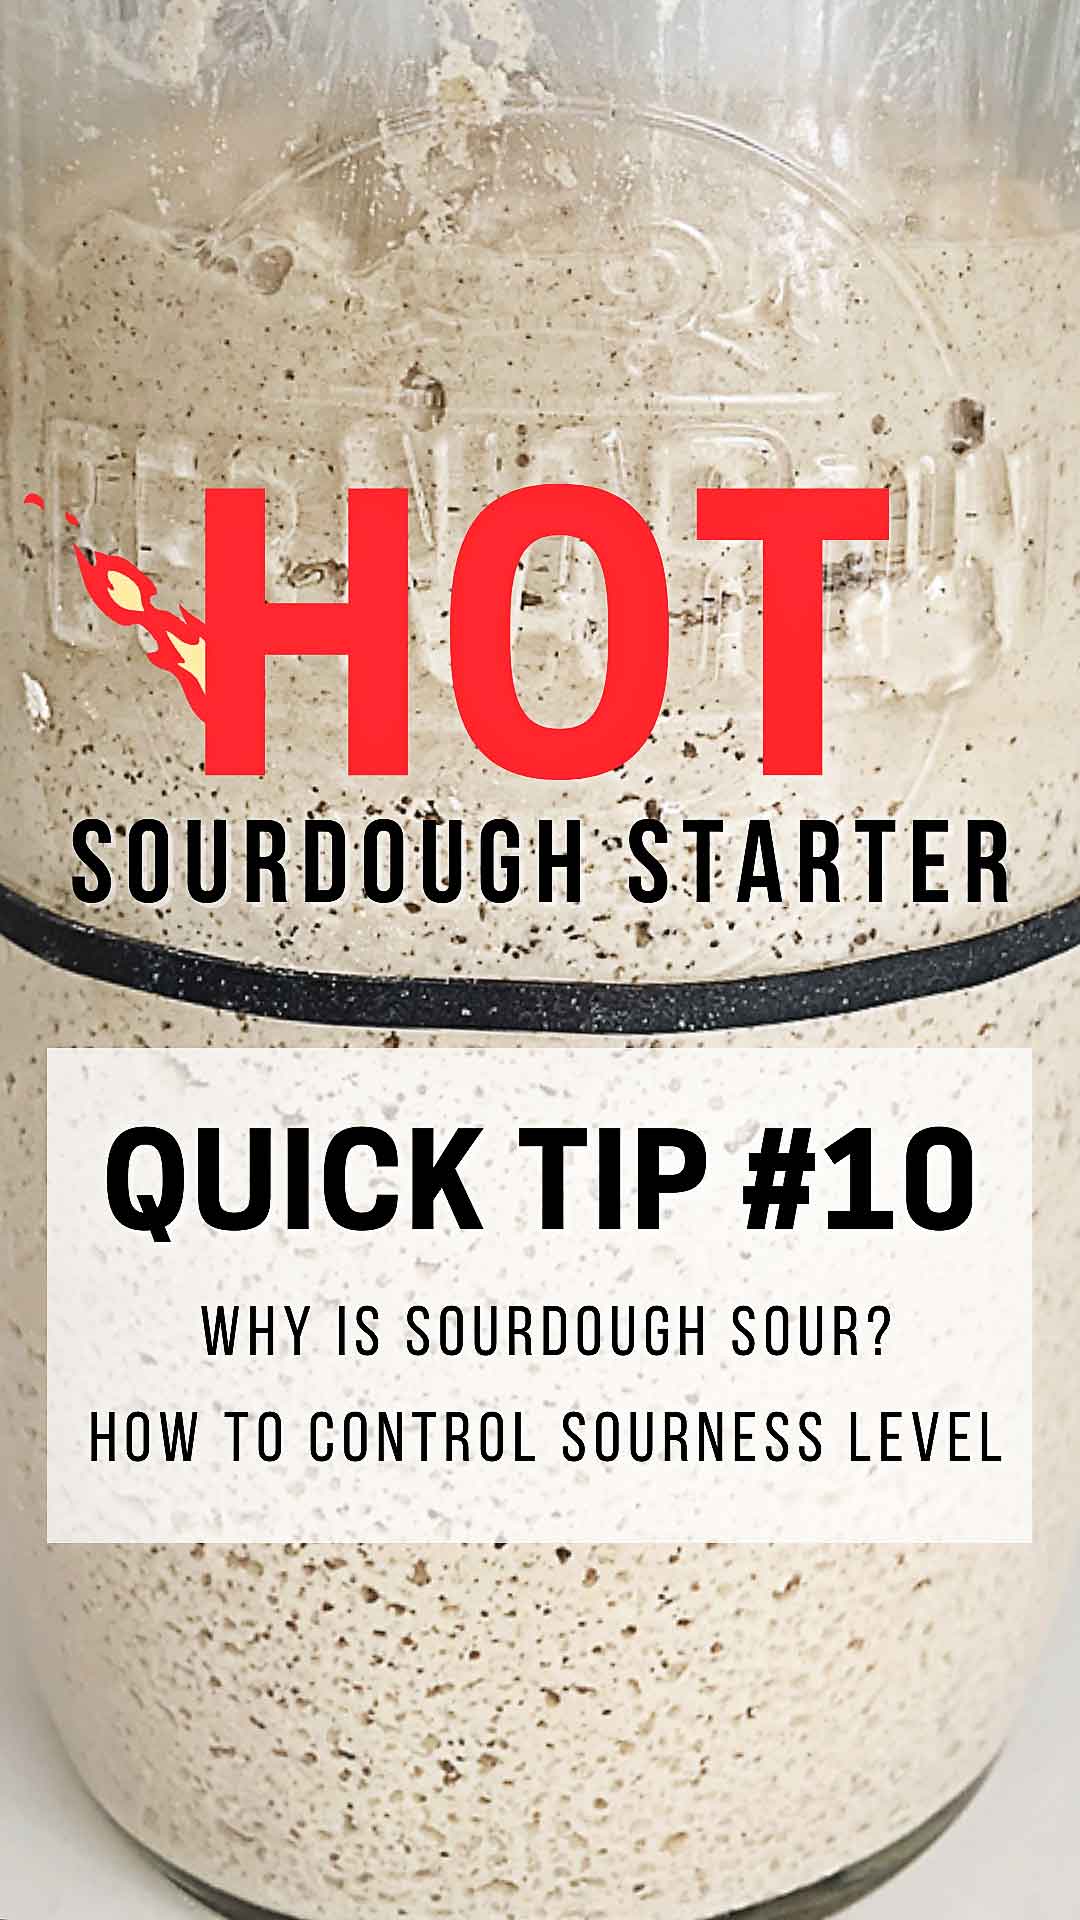 Learn why sourdough is sour and how to control the level of sourness in your sourdough with these quick tips! sourdough starter, sourdough tips and tricks